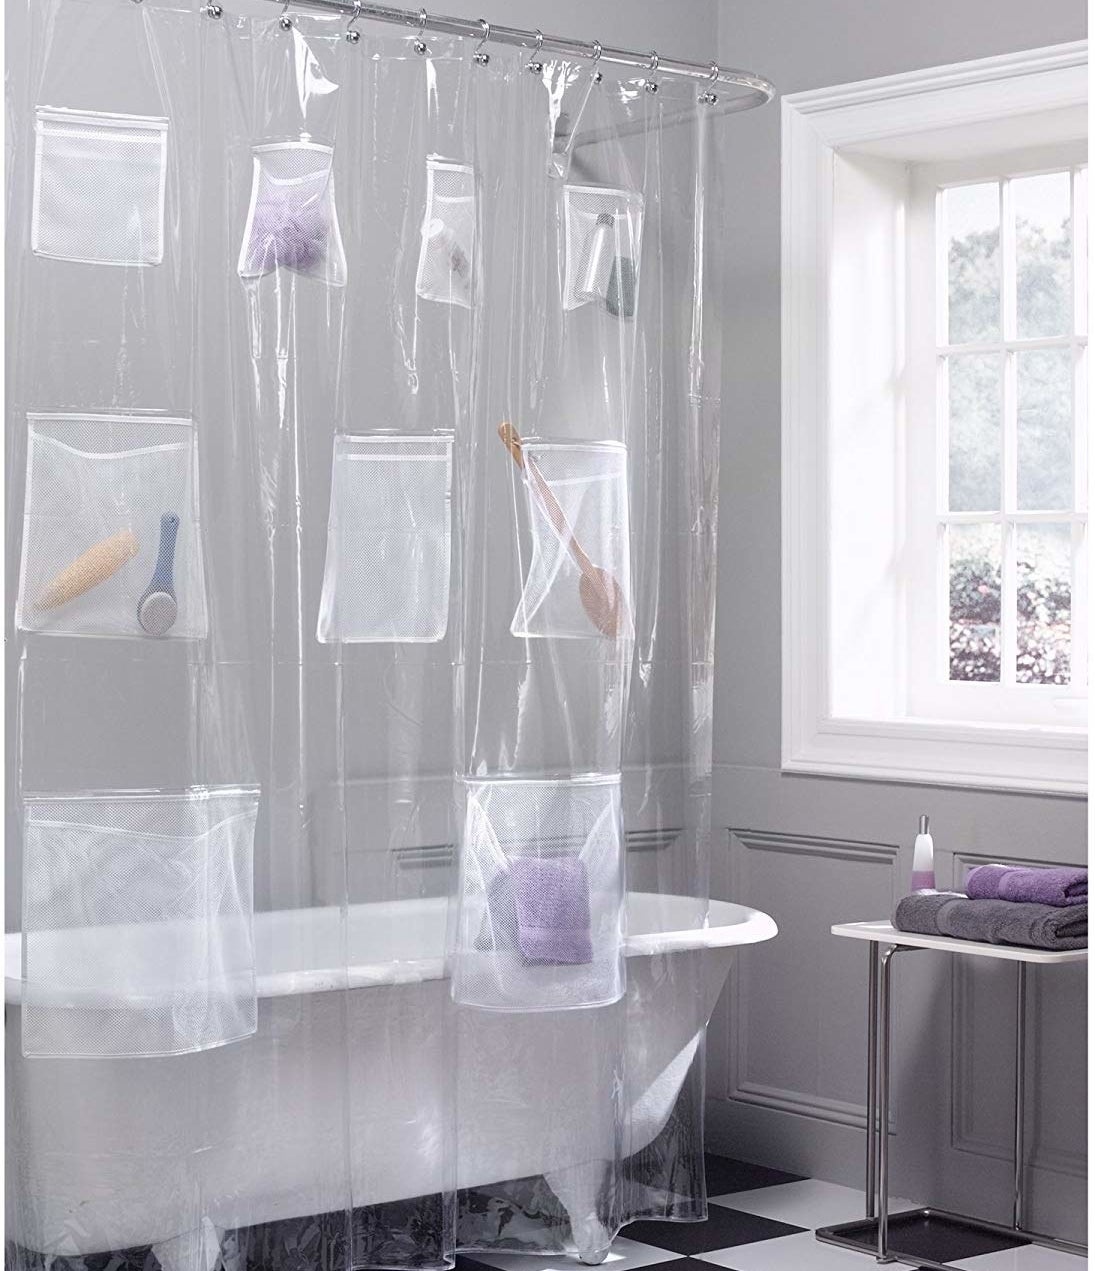 The shower curtain on a rod, filled with accessories and products